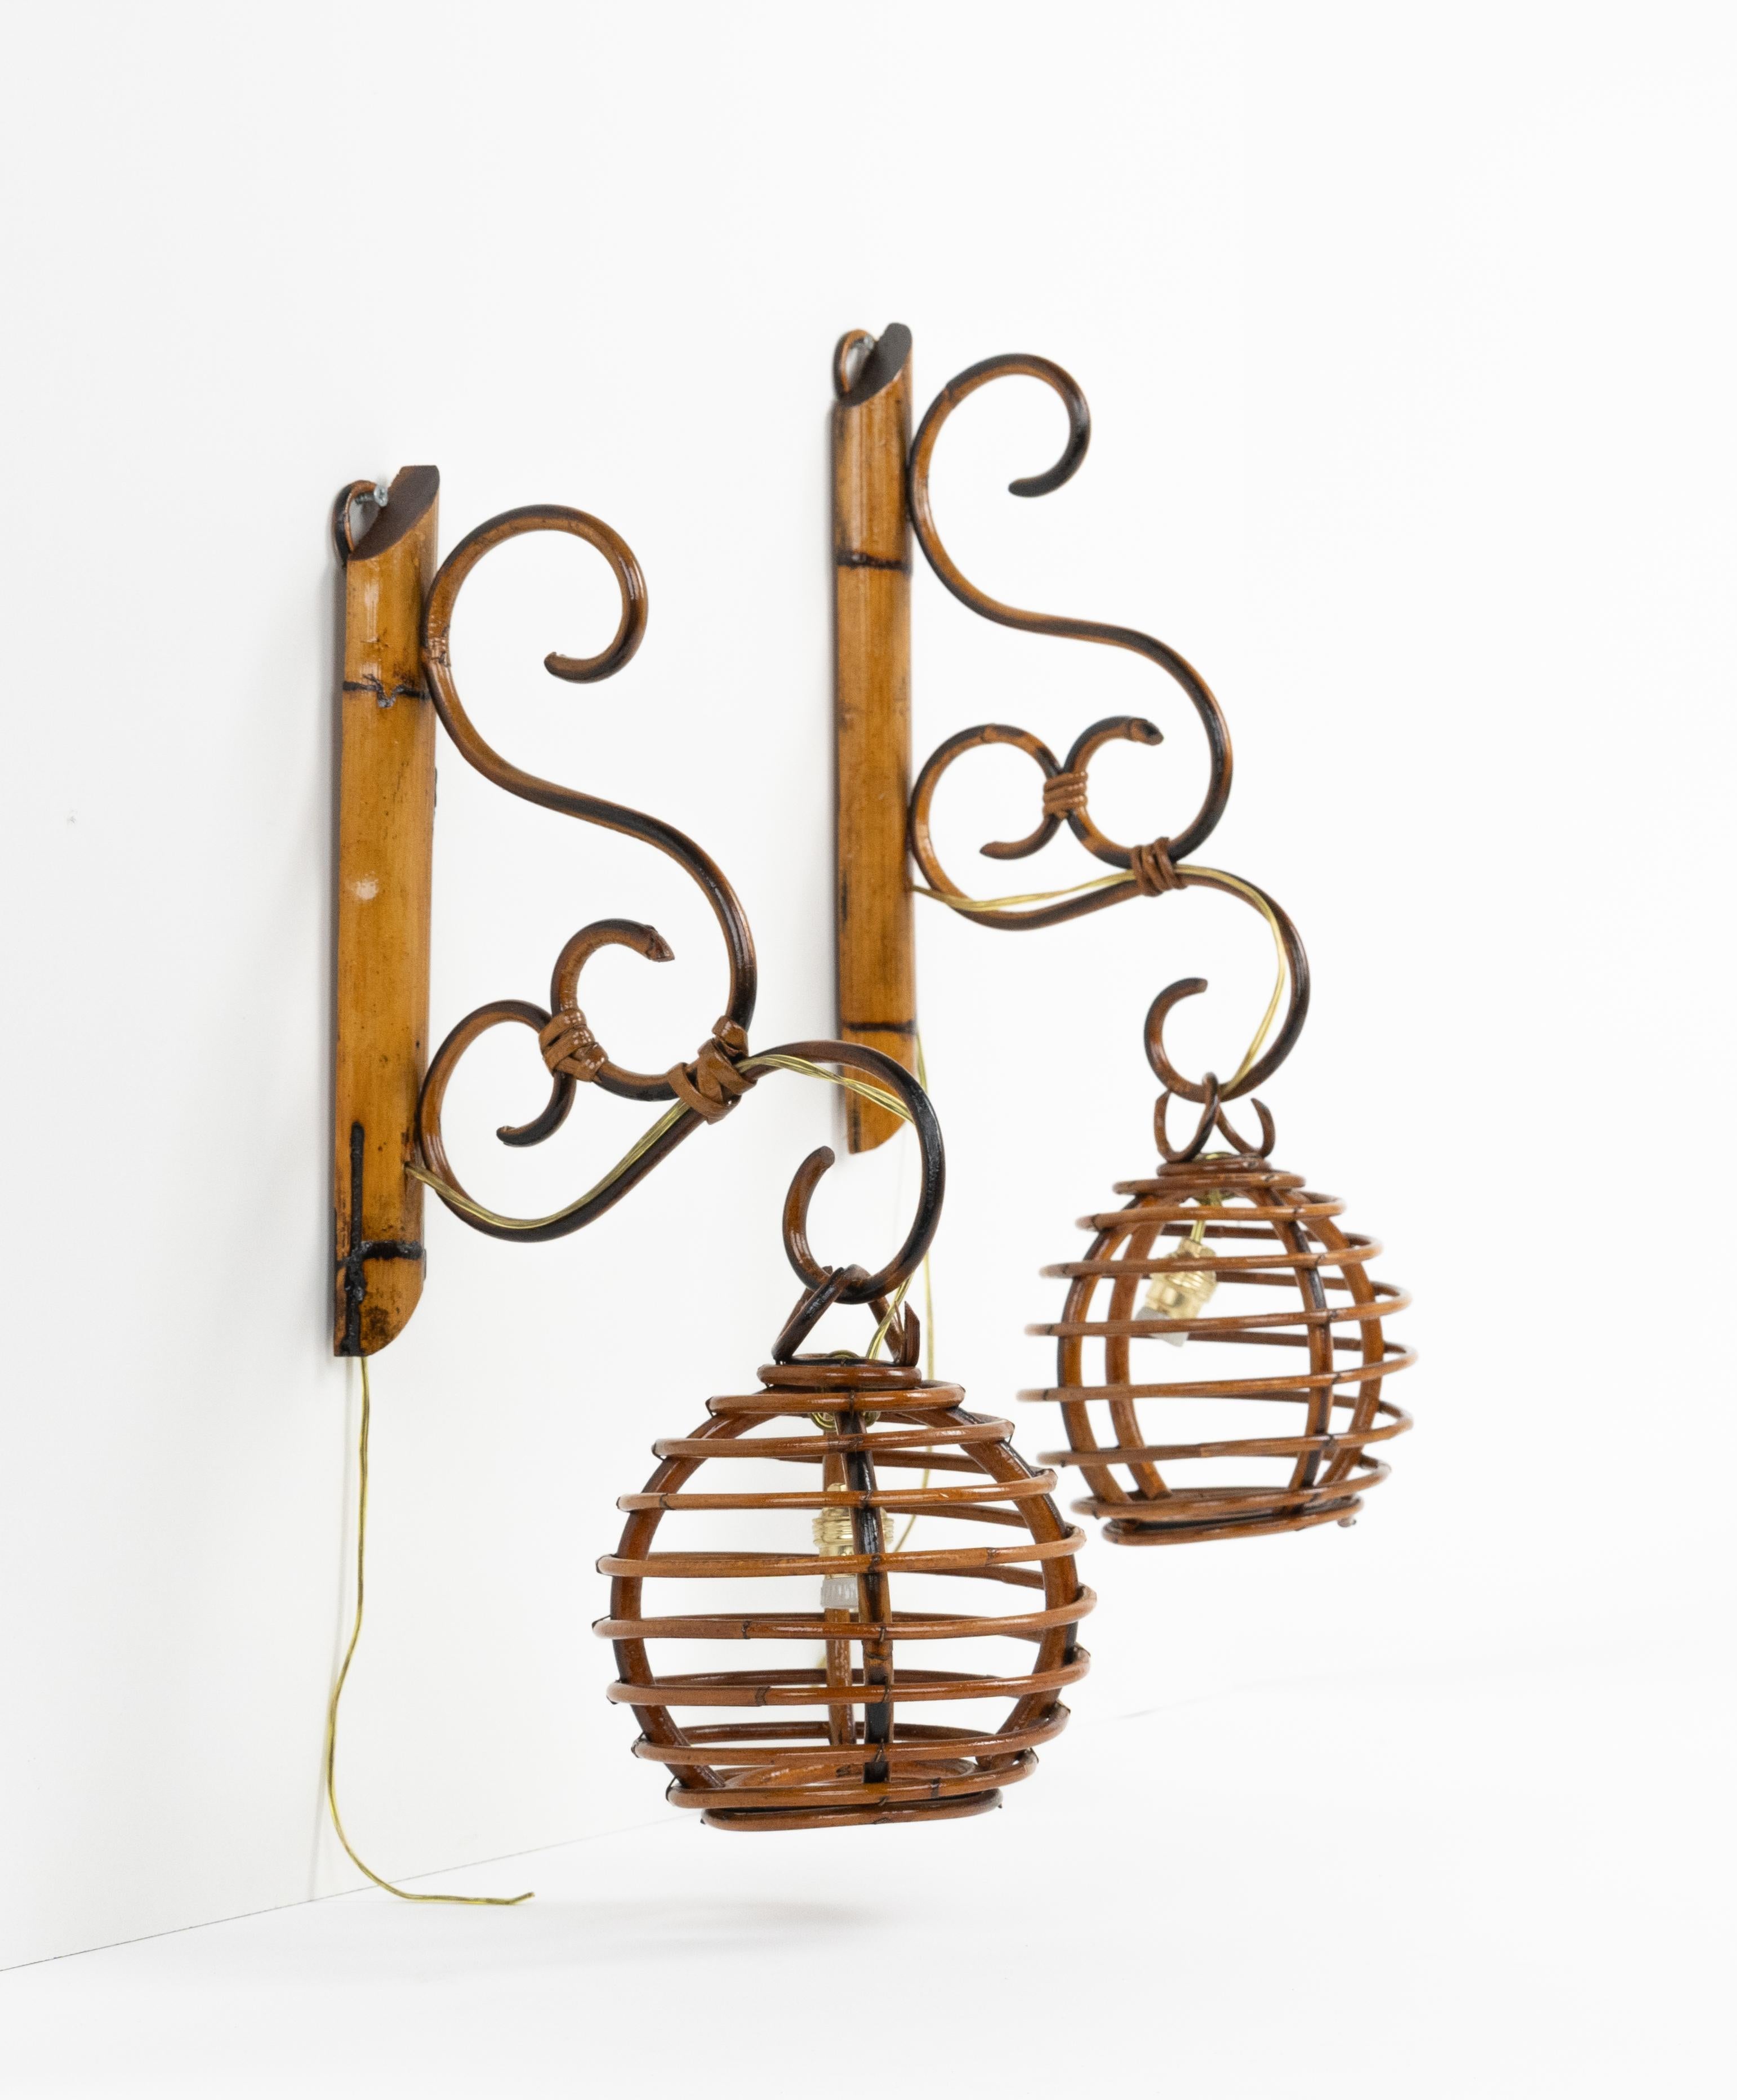 Midcentury Pair of Sconces in Bamboo and Rattan Louis Sognot Style, Italy 1960s For Sale 3